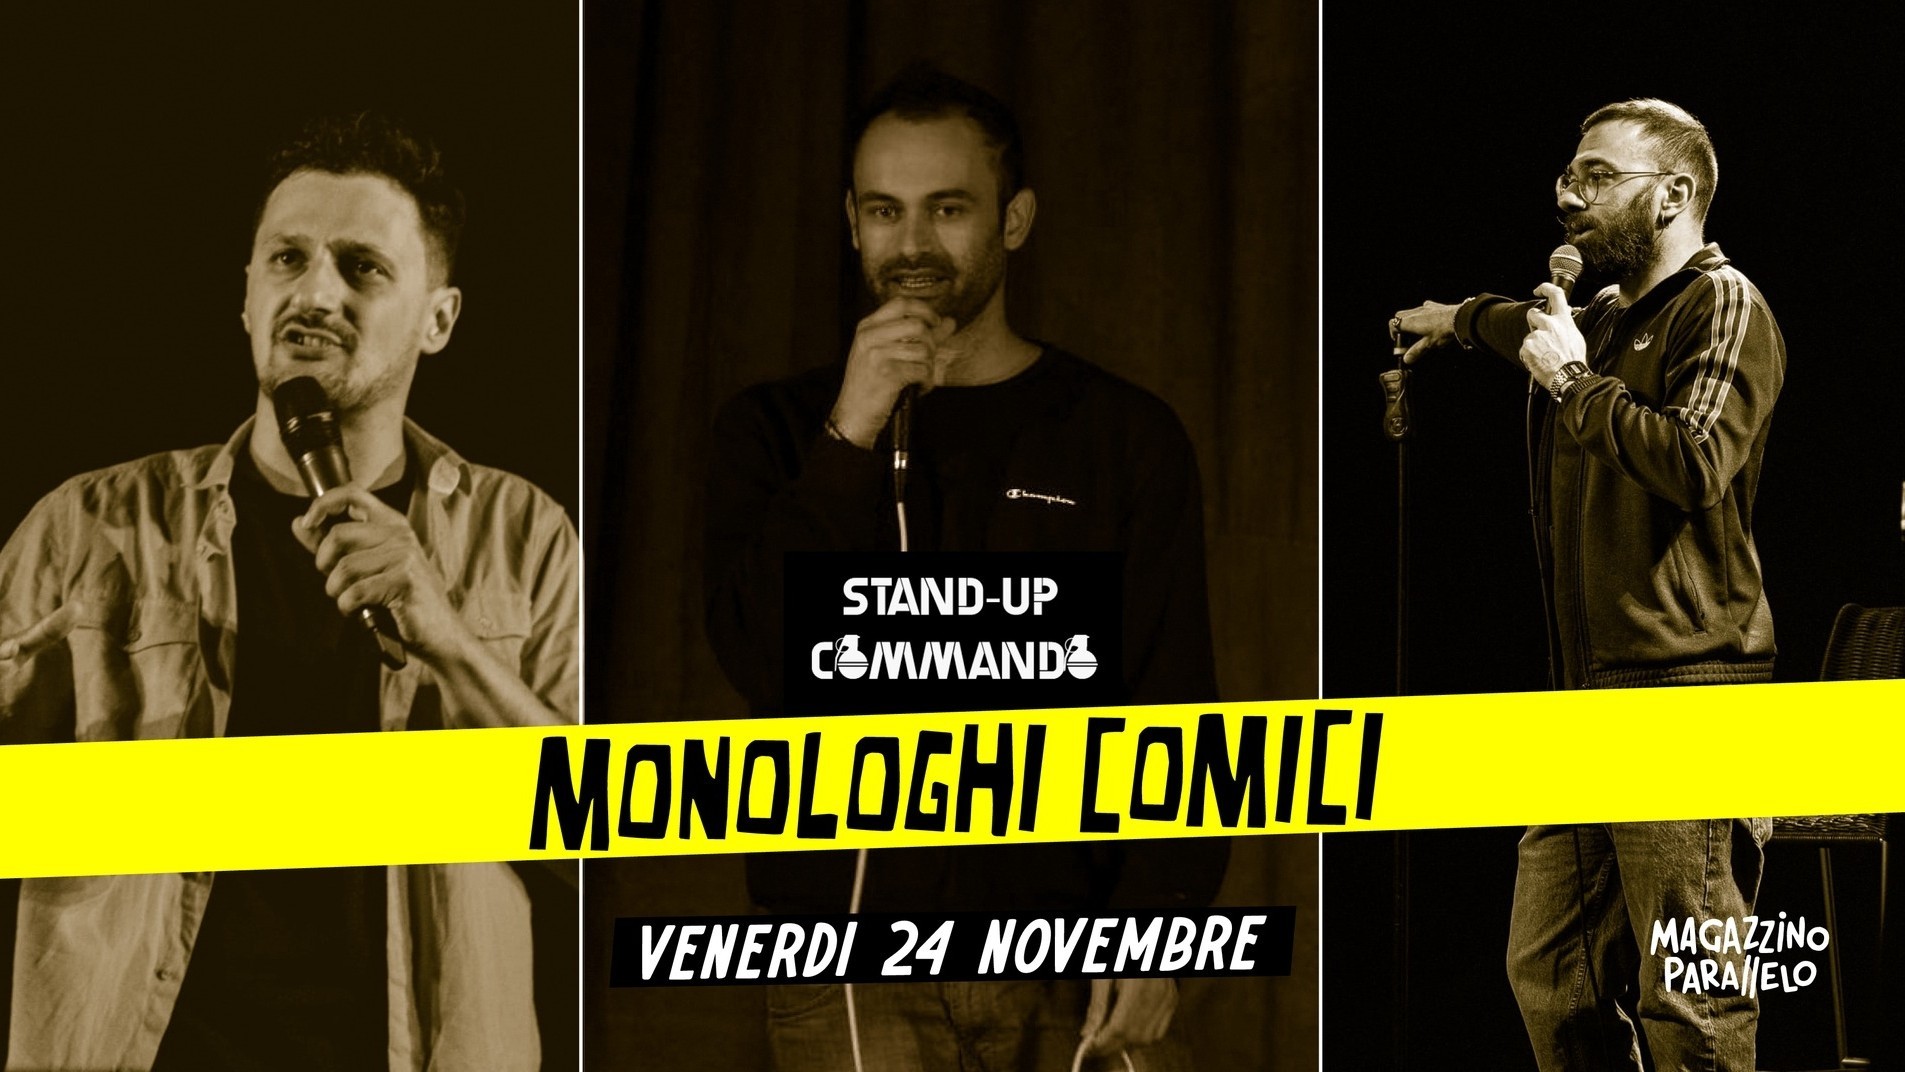 Stand-up Command - Monologhi Comici